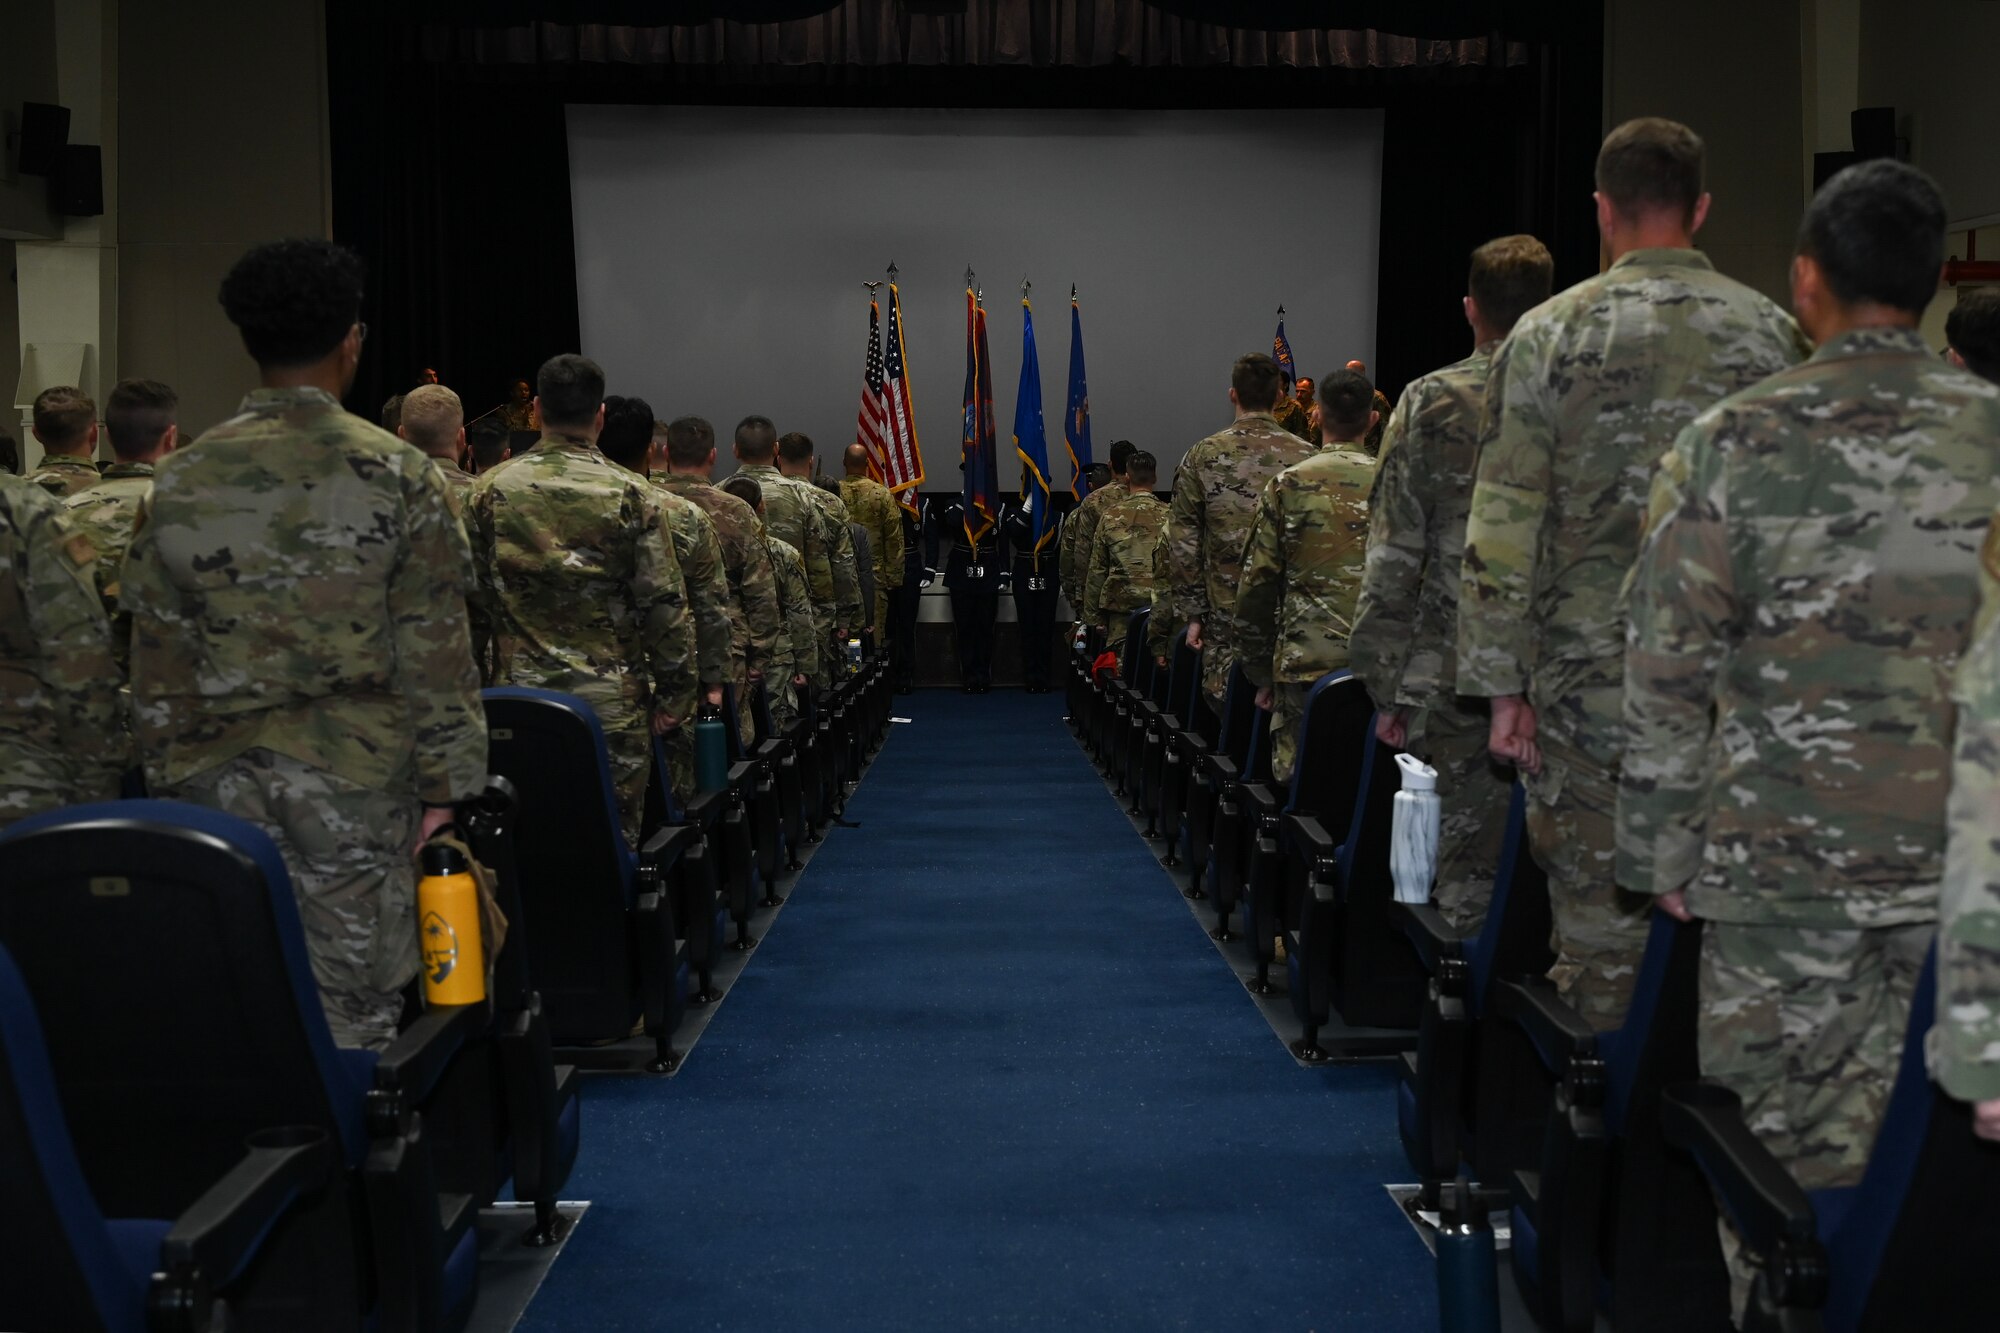 Airmen from the 356th Expeditionary Civil Engineer Group stand in attention stance.